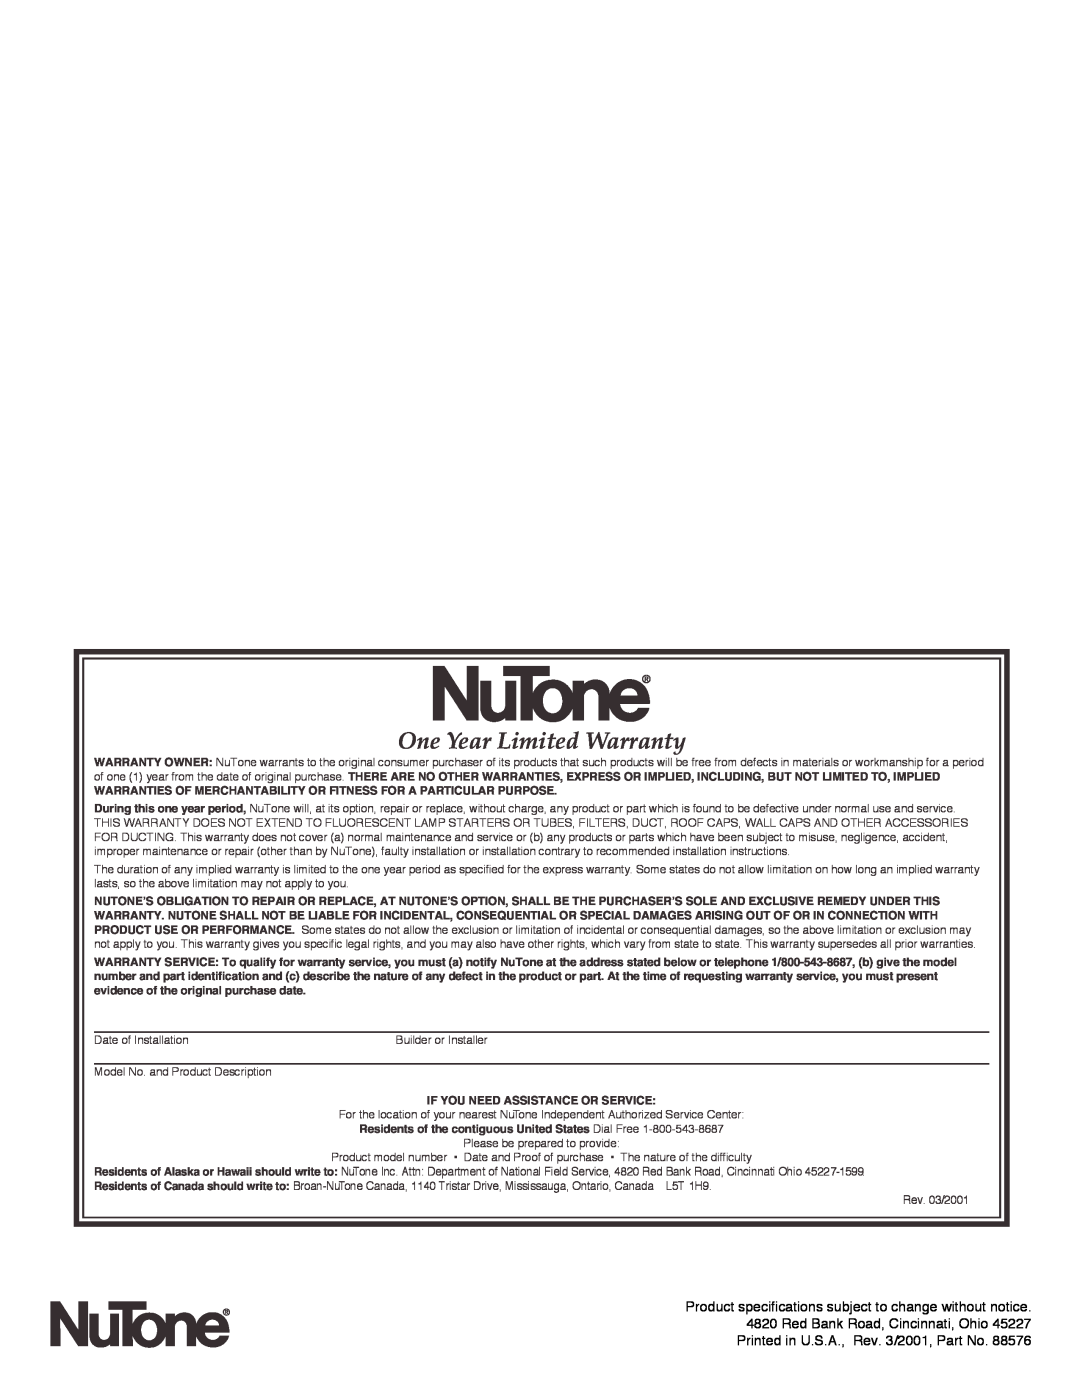 NuTone 665RF One Year Limited Warranty, Warranties Of Merchantability Or Fitness For A Particular Purpose 